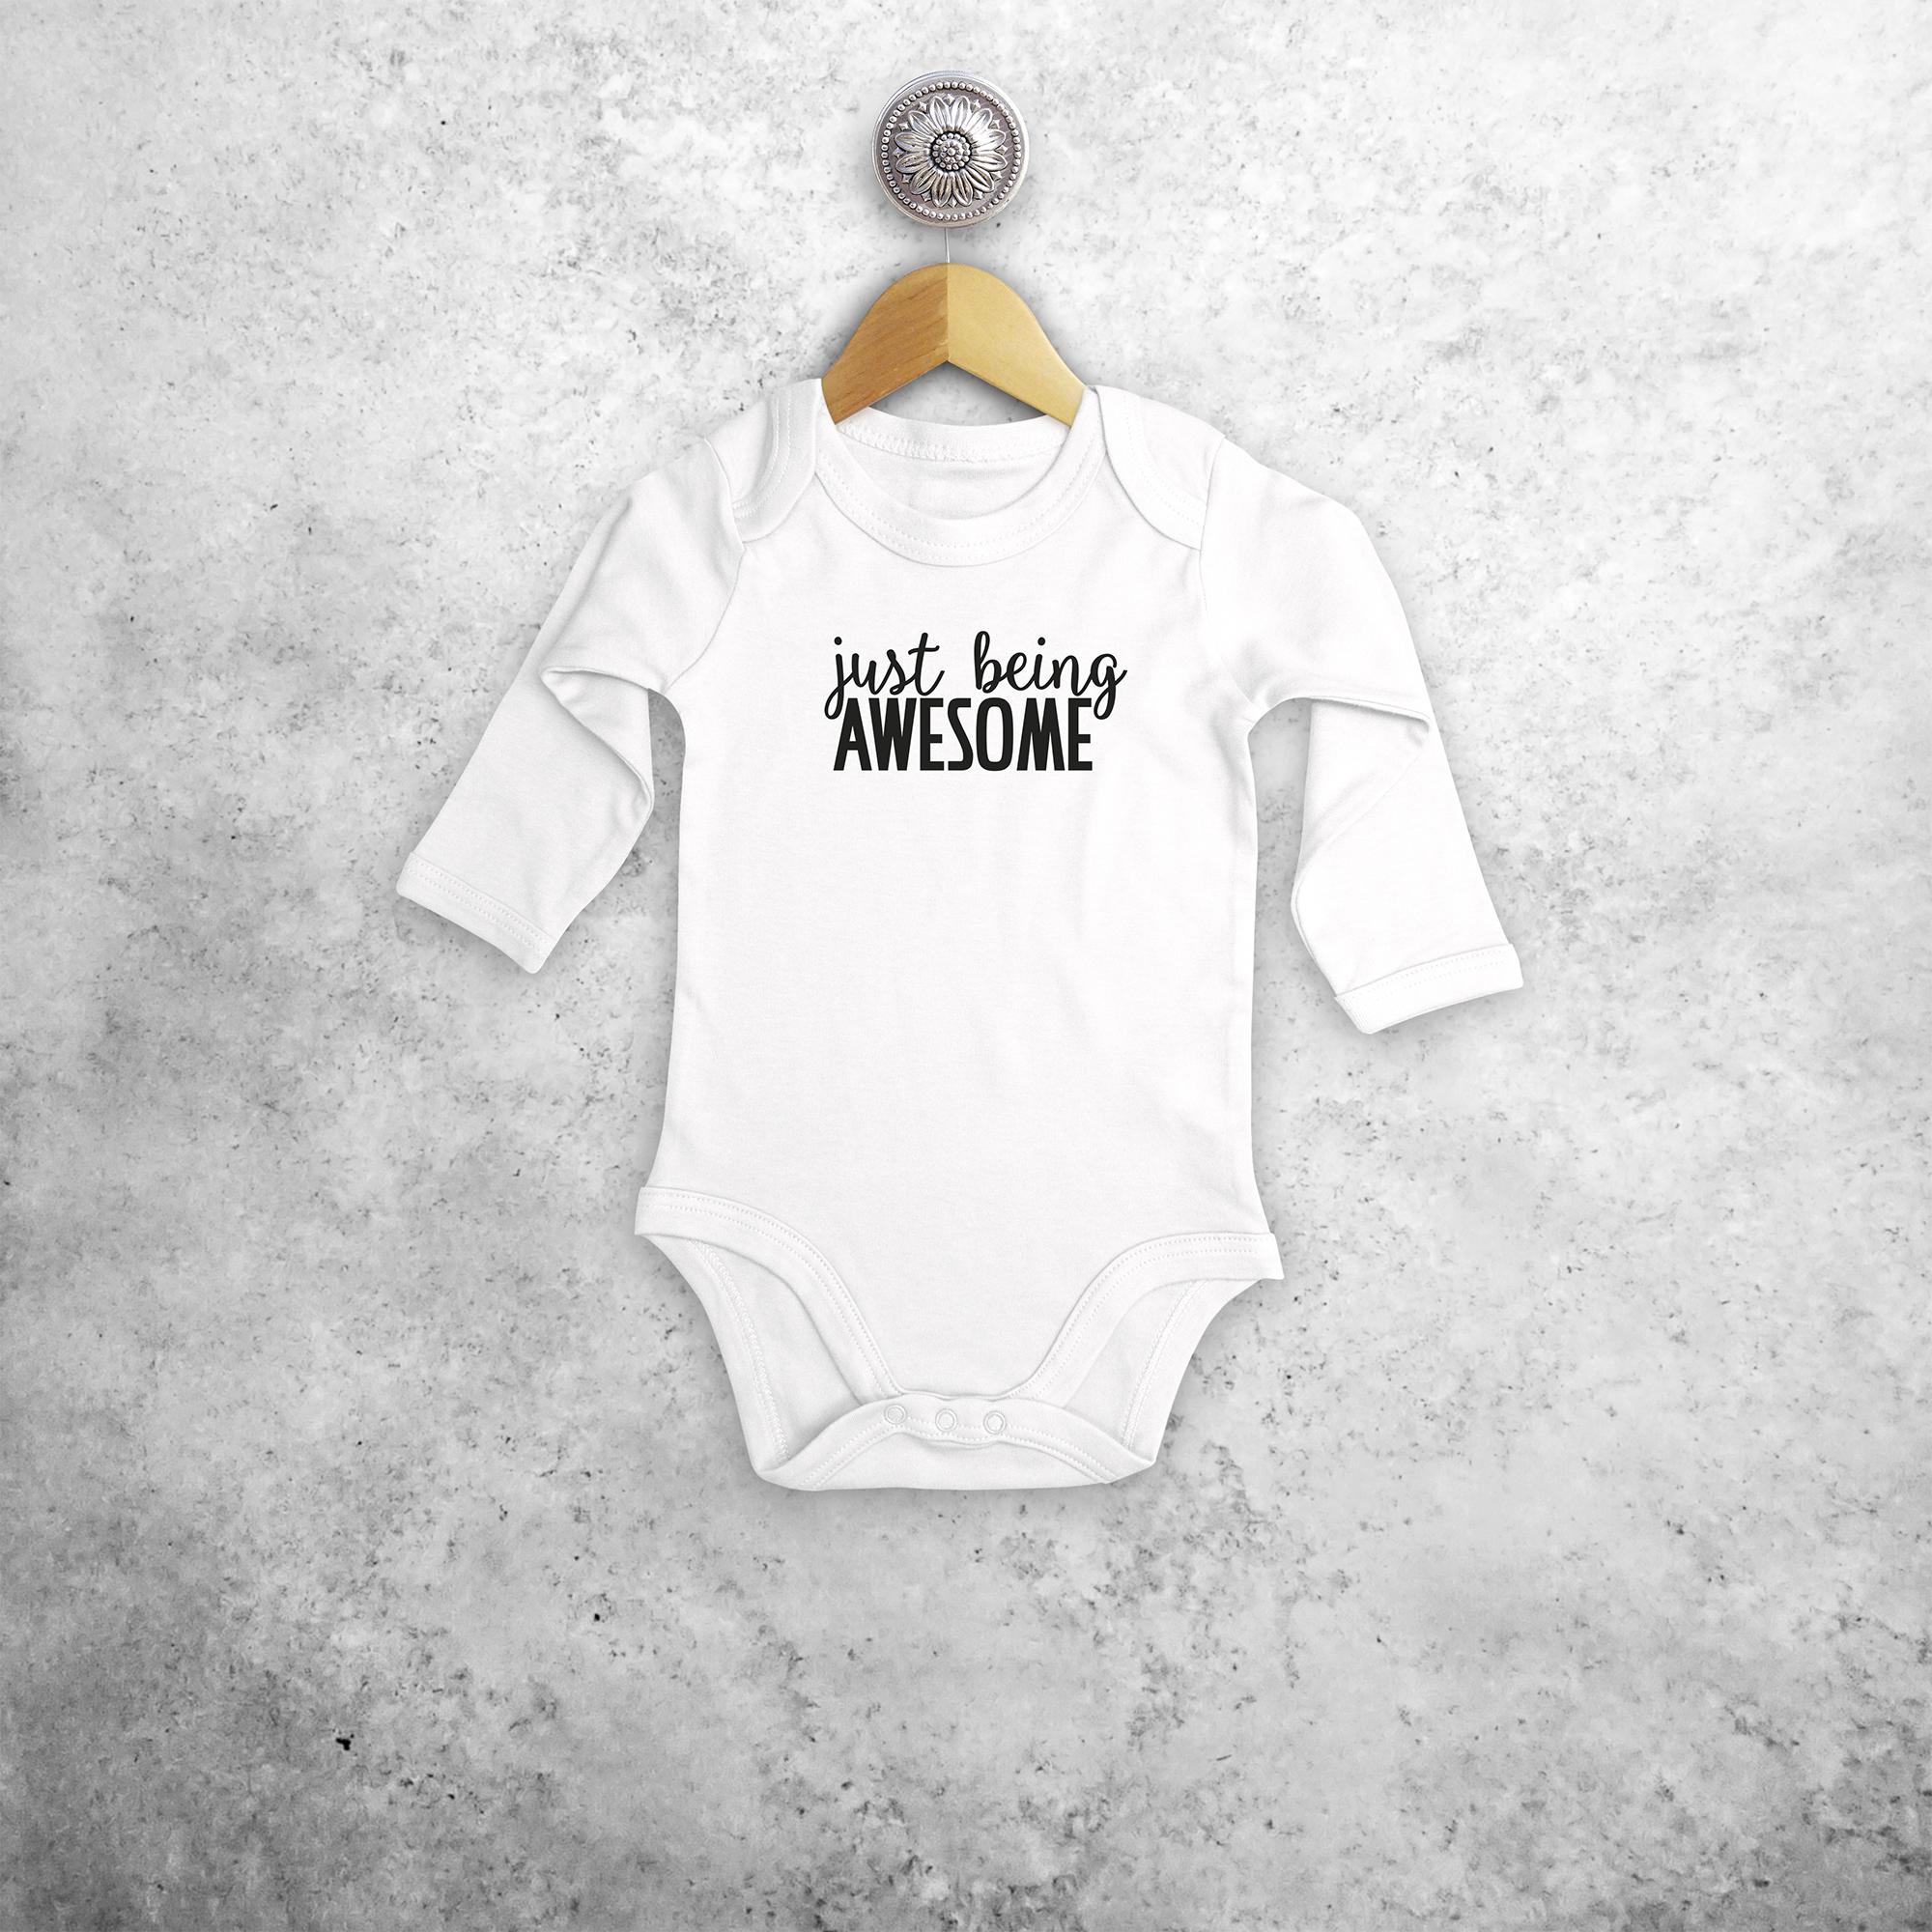 'Just being awesome' baby longsleeve bodysuit